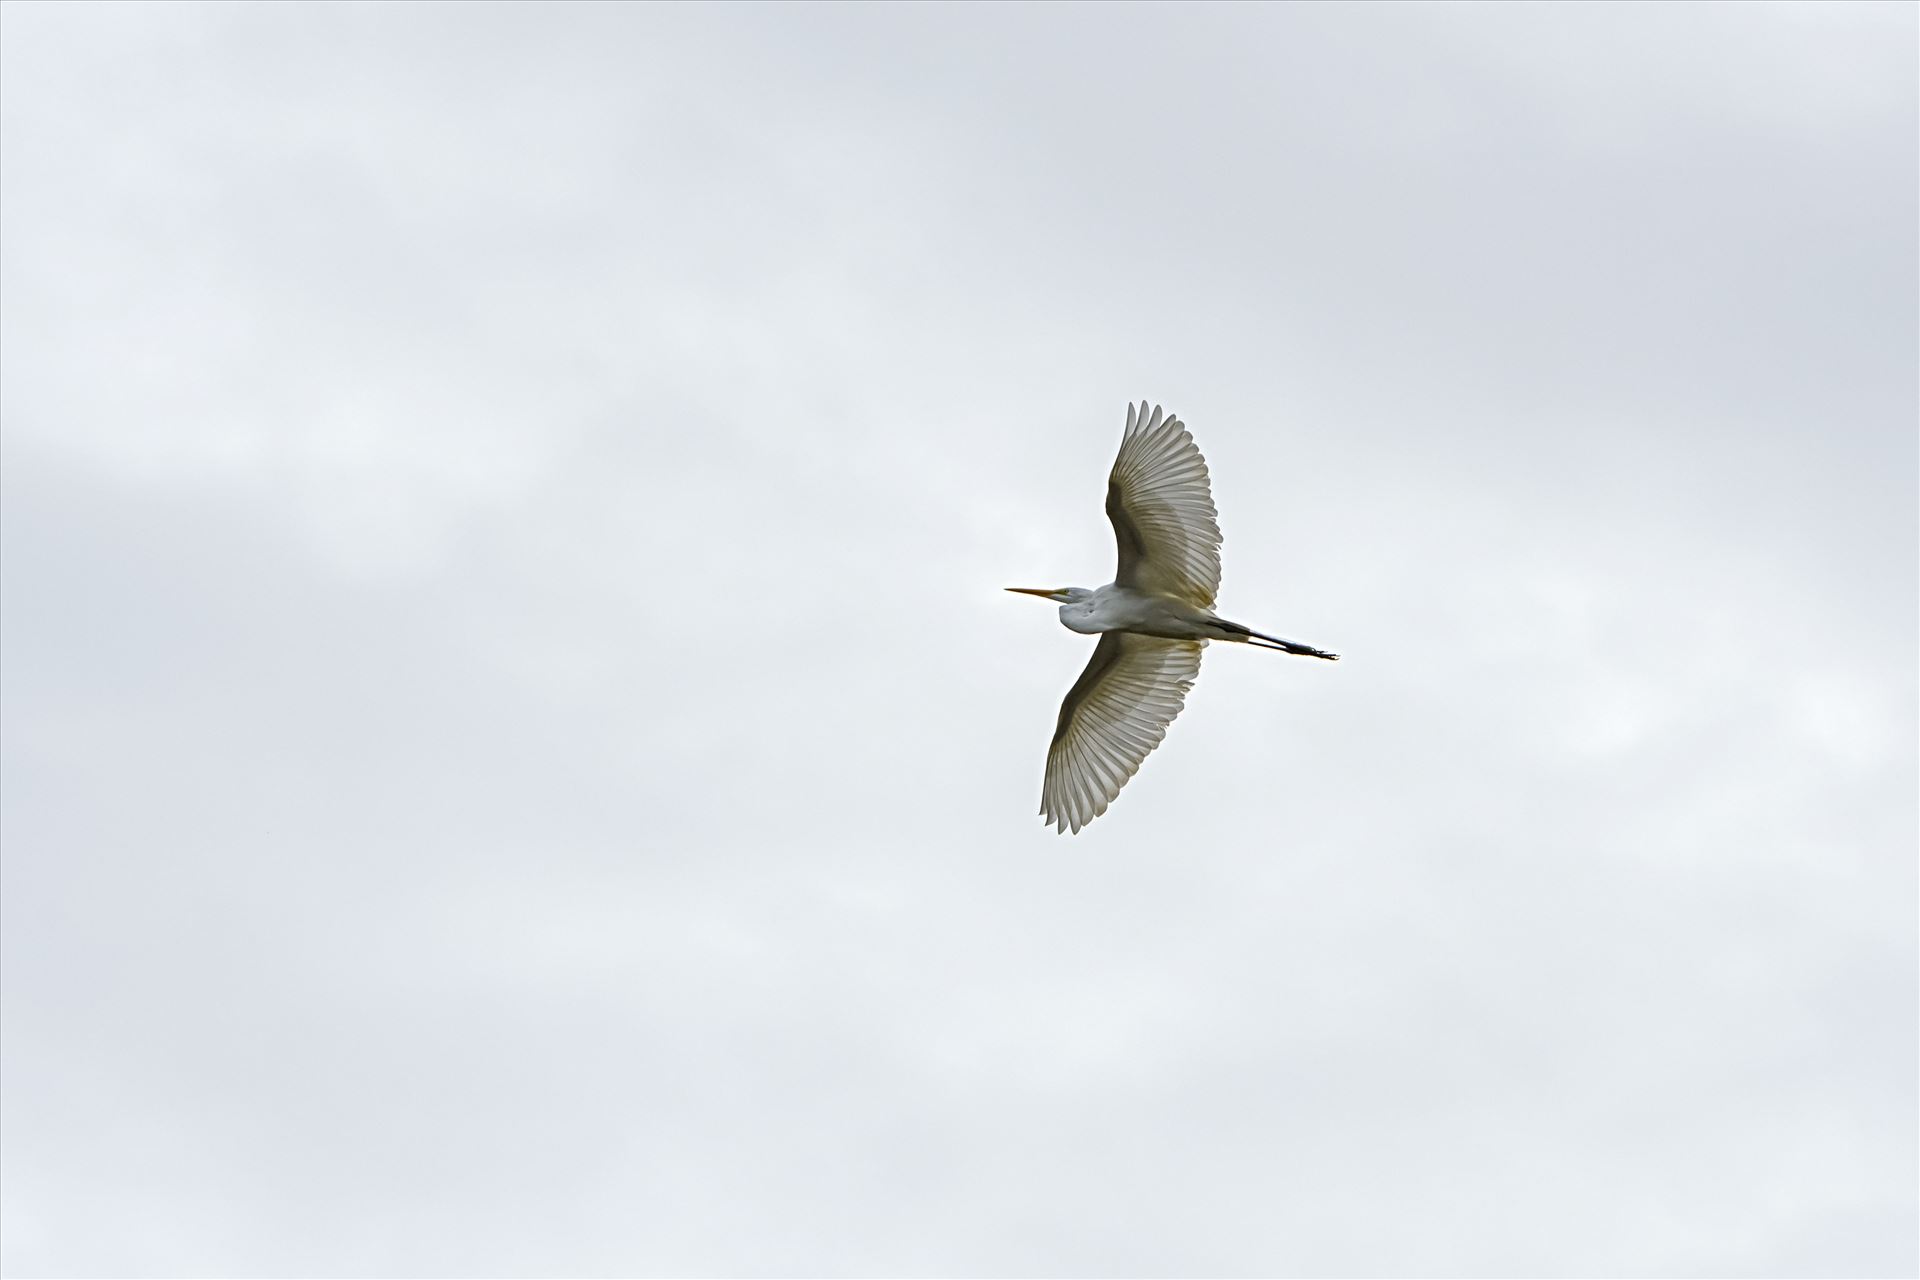 great white egert in flight ss alamy 8106865.jpg Great white egret flying high over Lake Caroline in Panama city, Florida. by Terry Kelly Photography